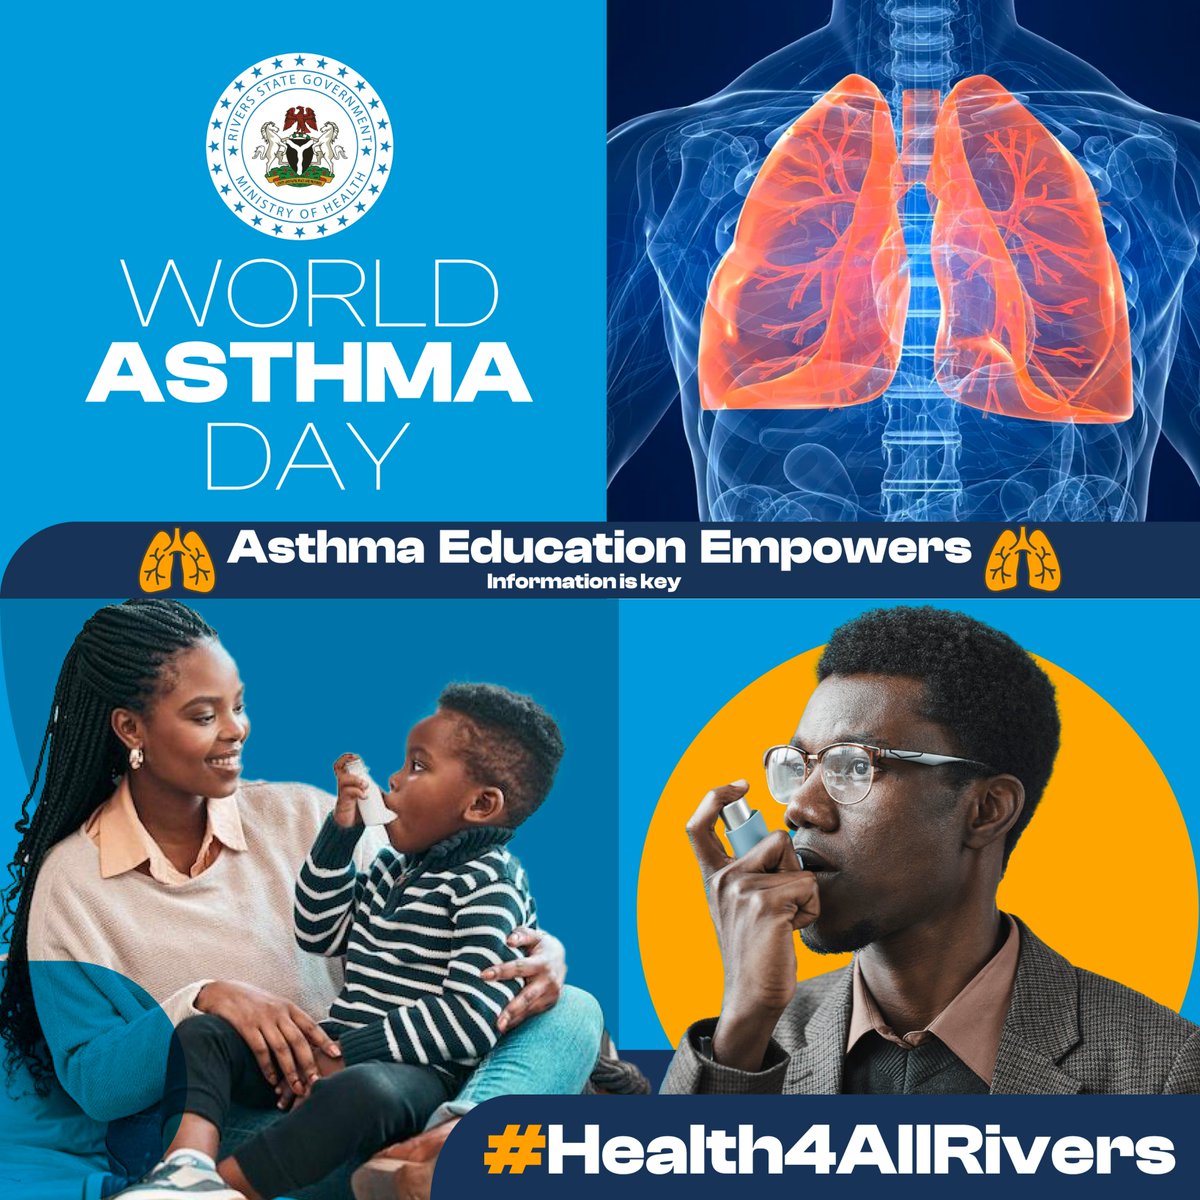 Today, on #WorldAsthmaDay, we join the global effort to raise awareness about Asthma, a common lung condition affecting millions of people. This year's theme, 'Asthma Education Empowers,' highlights the importance of education for people with asthma to manage their condition